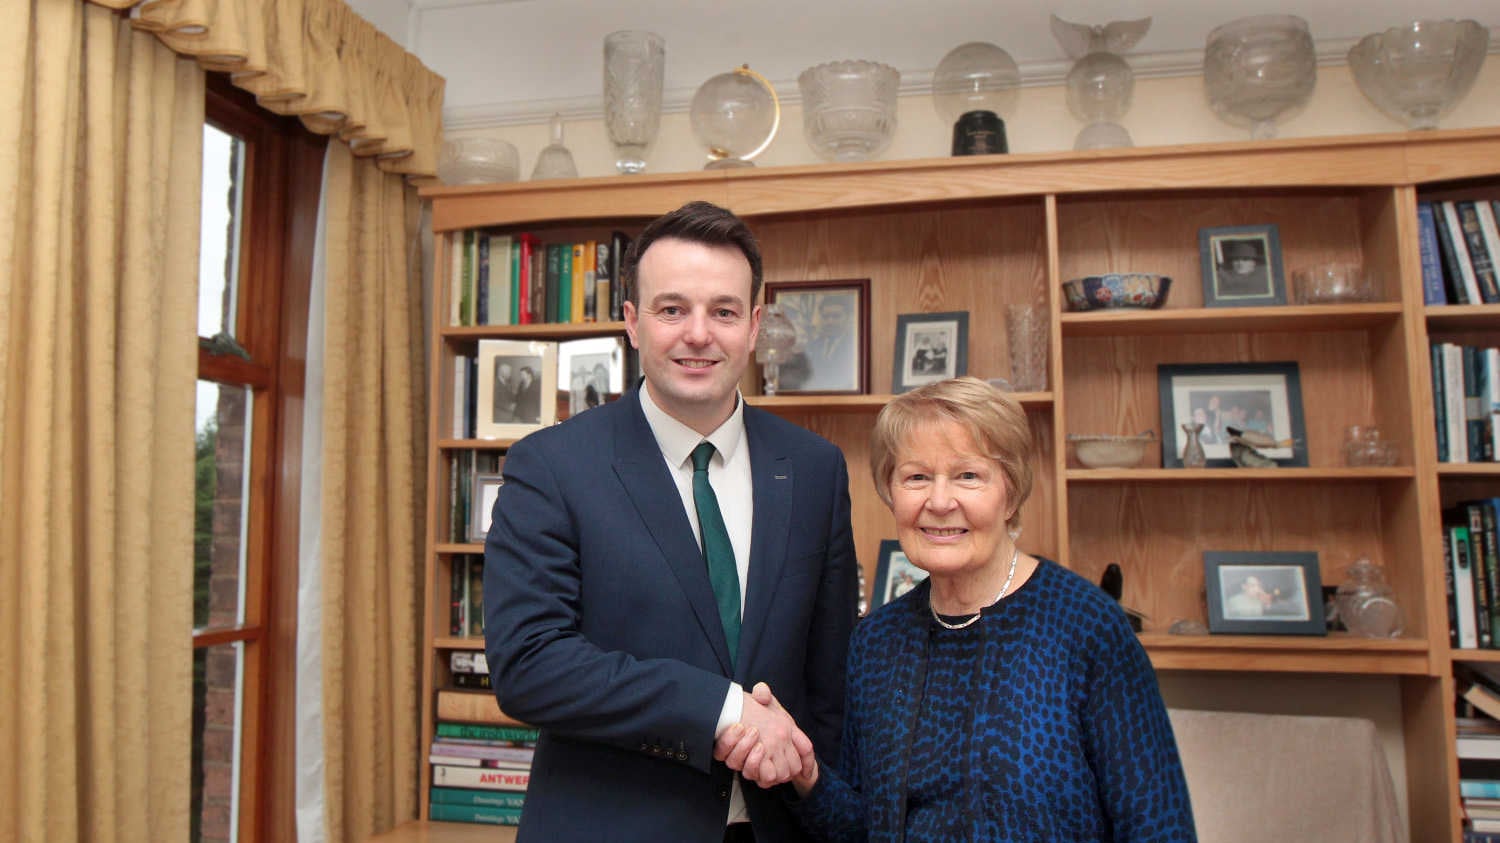 &nbsp;SDLP leadership candidate Colum Eastwood with Pat Hume, wife of party founder and former leader John Hume. Picture by Margaret McLaughlin